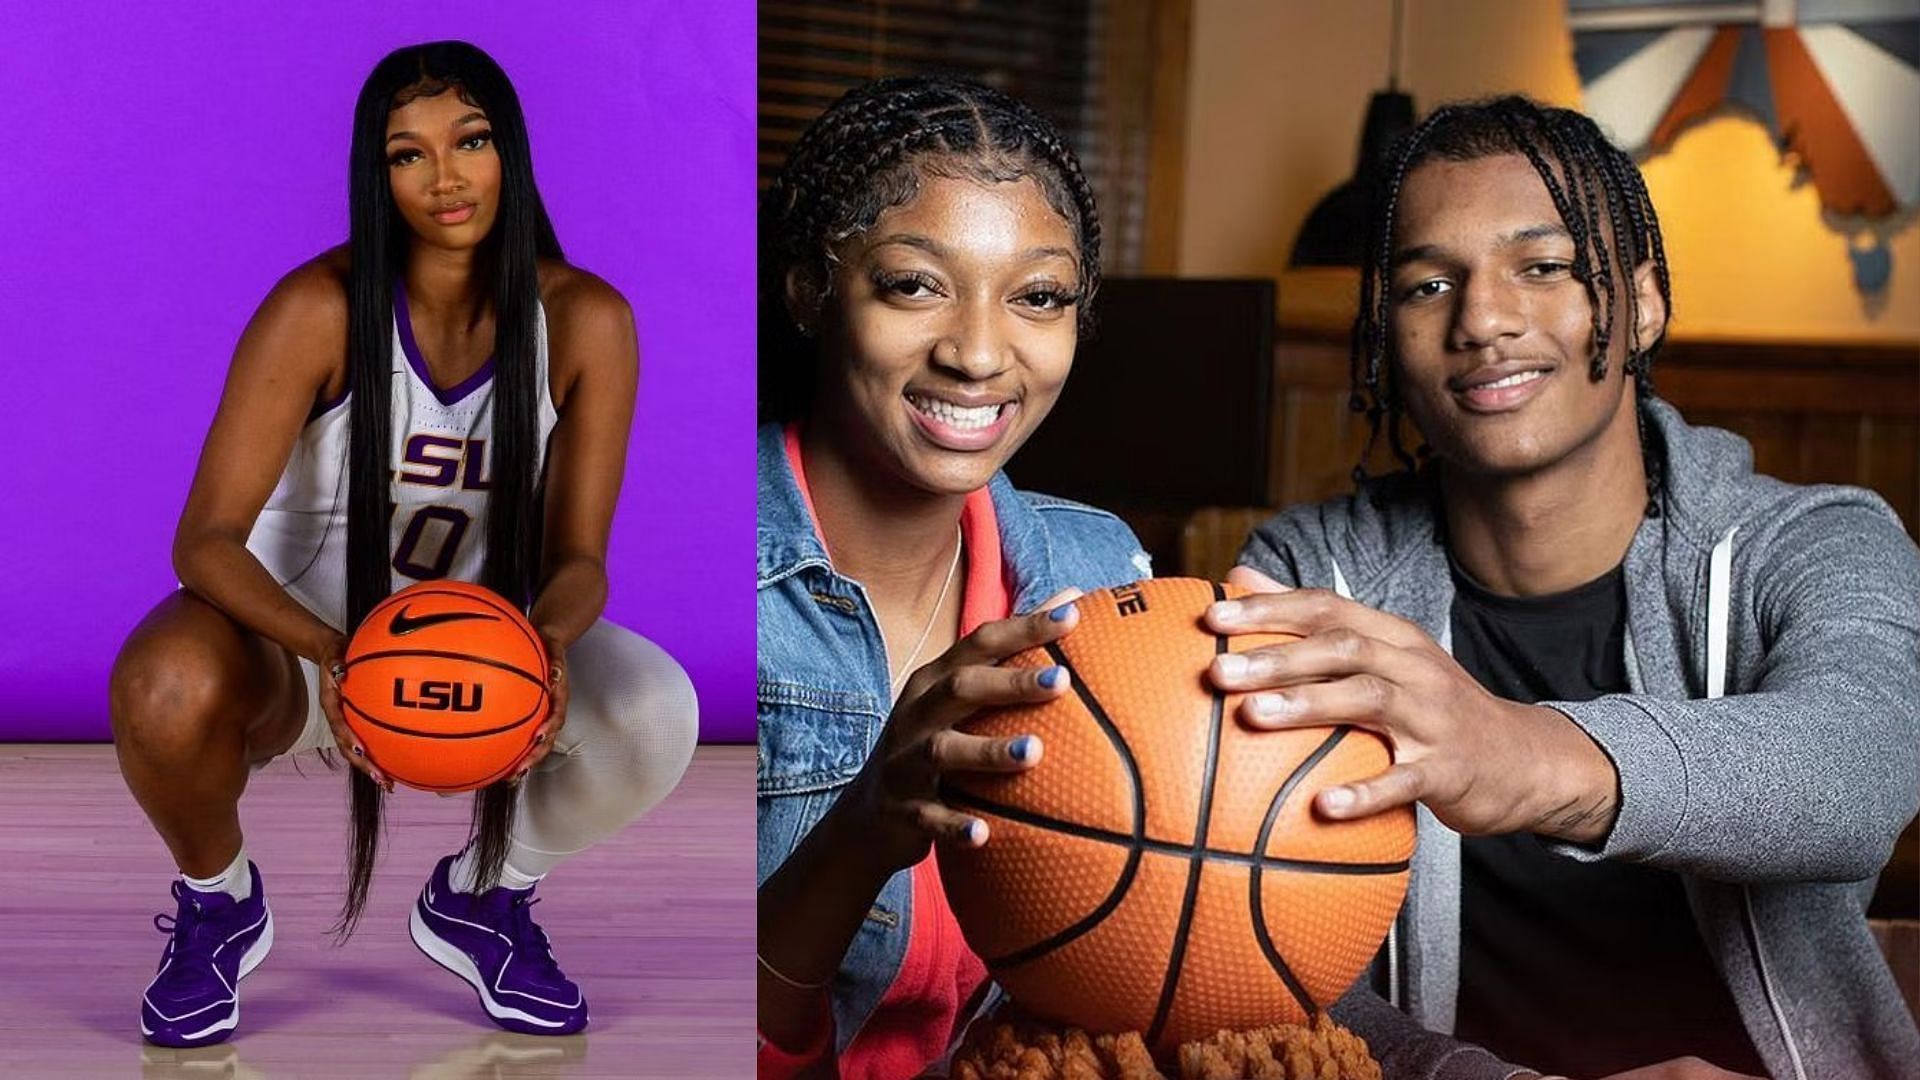 LSU Tigers basketball star Angel Reese and her brother, Julian Reese